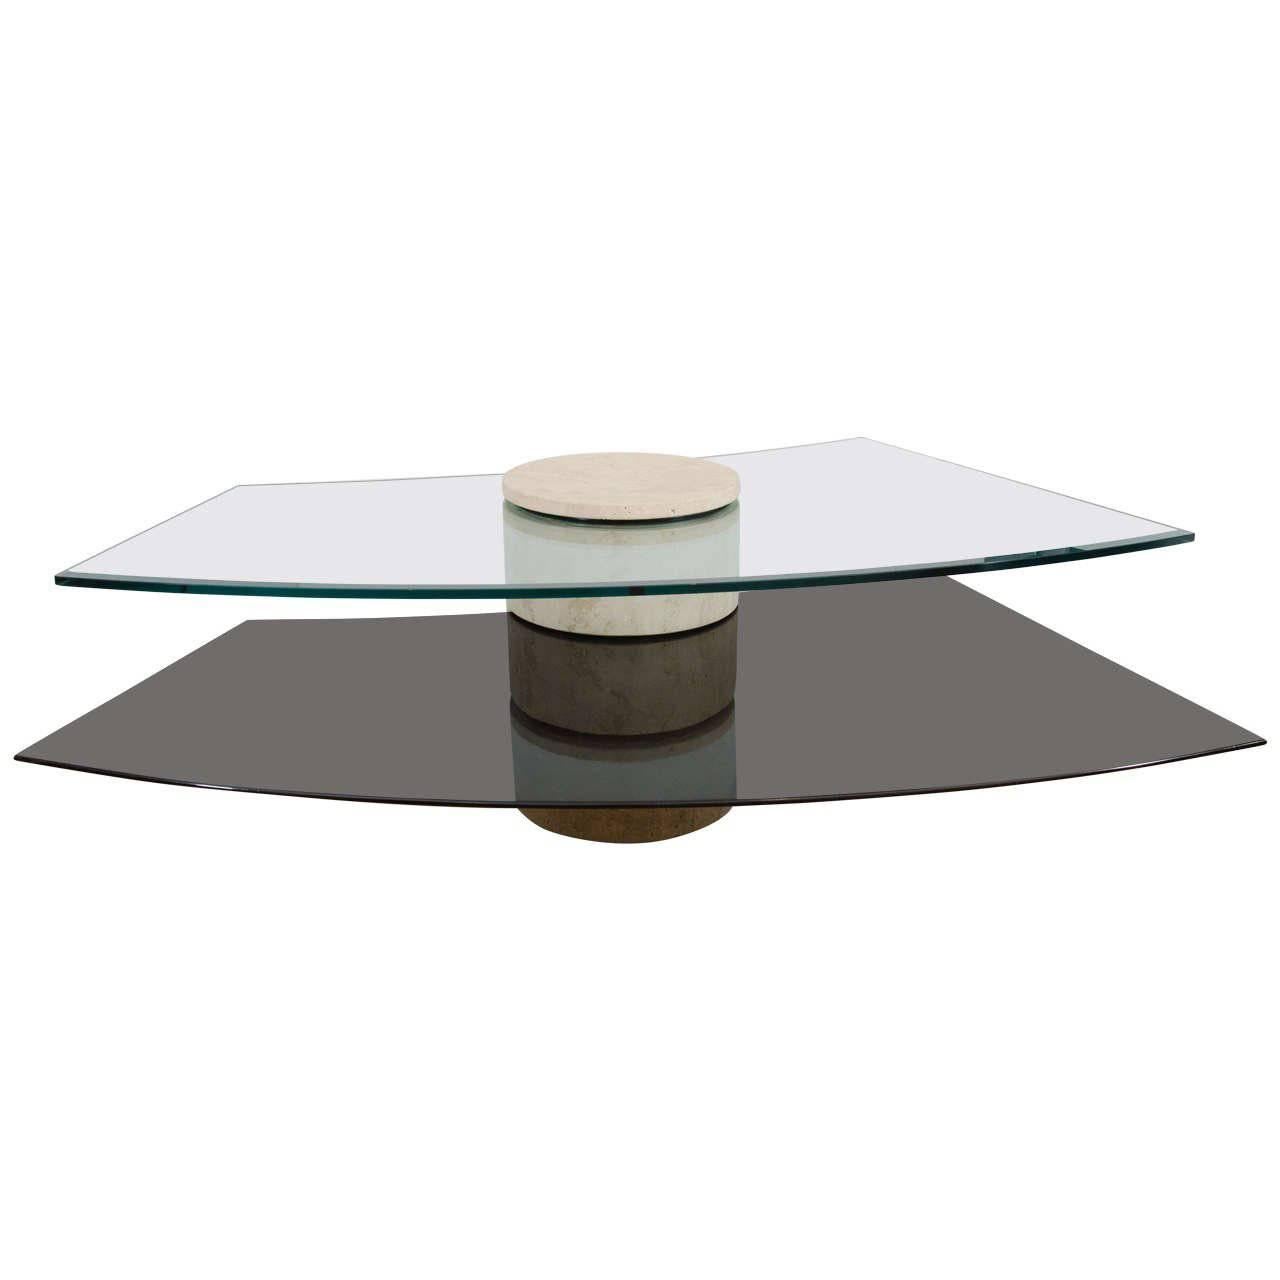 Adjustable Travertine, Wood and Glass Coffee Table